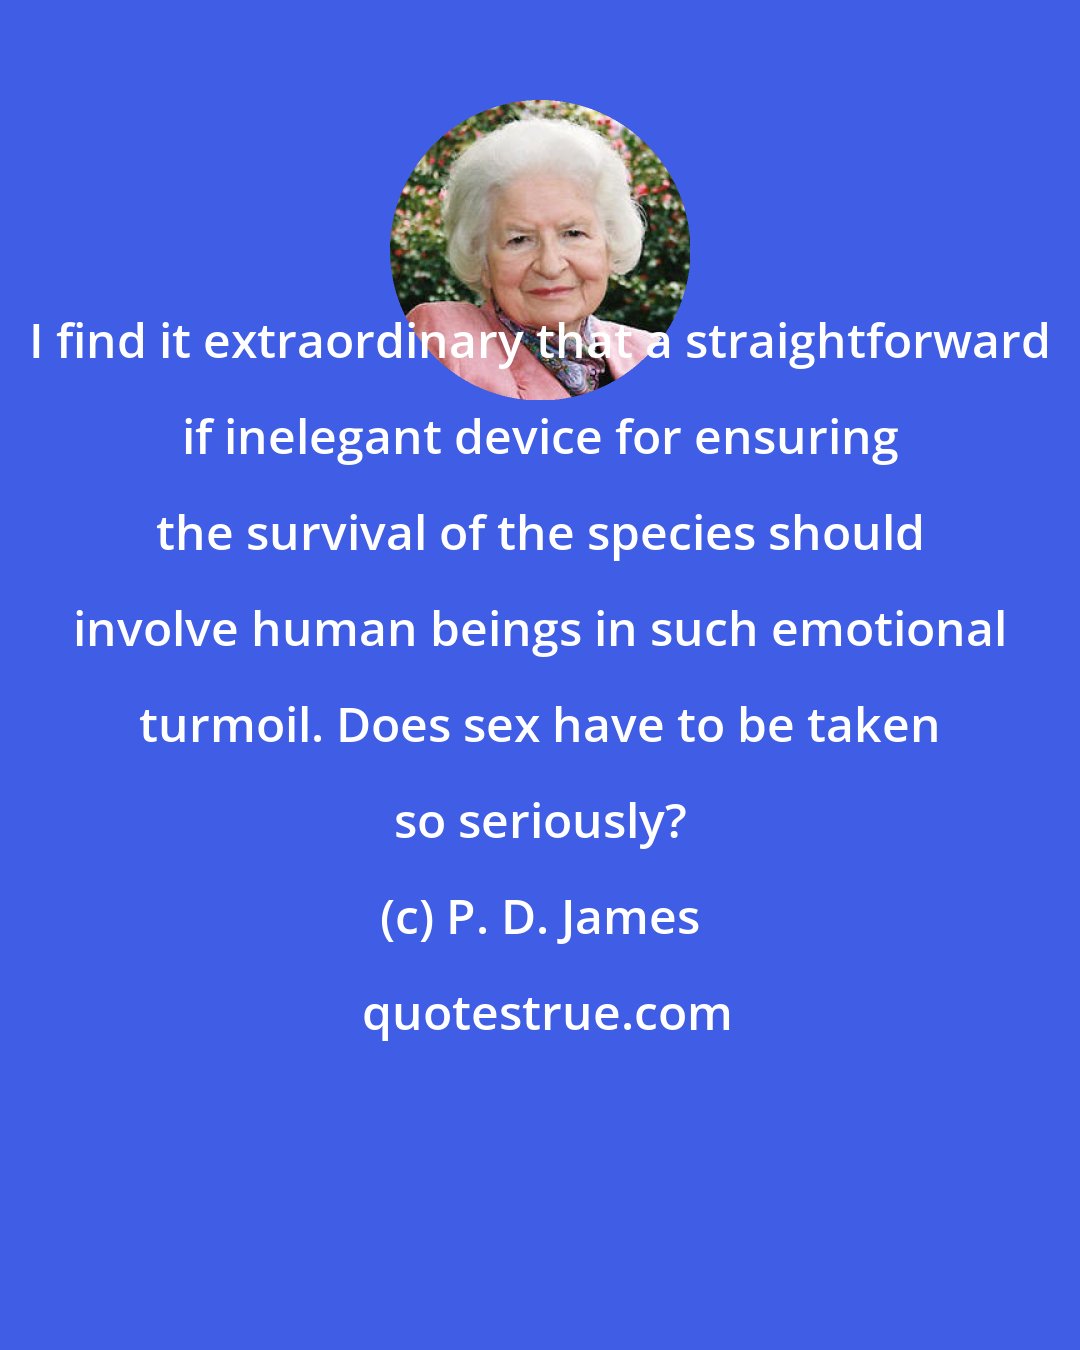 P. D. James: I find it extraordinary that a straightforward if inelegant device for ensuring the survival of the species should involve human beings in such emotional turmoil. Does sex have to be taken so seriously?